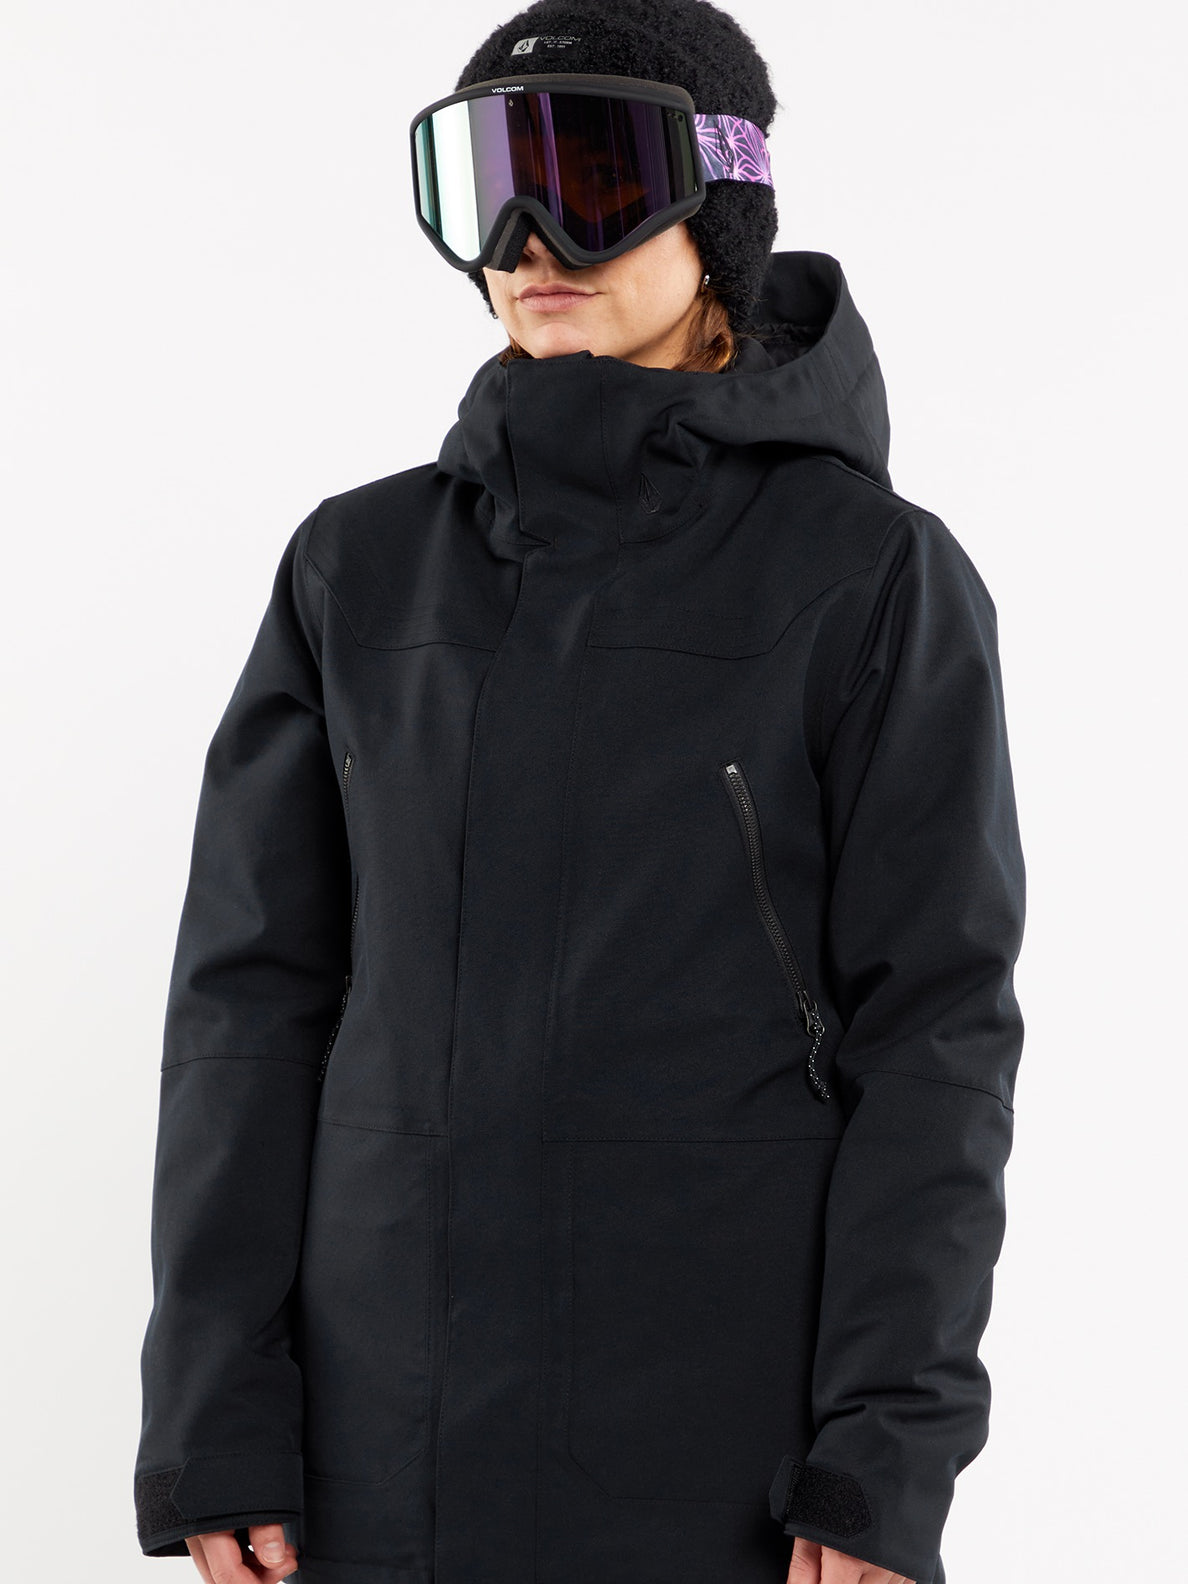 Shadow Insulated Jacket - BLACK (H0452408_BLK) [33]